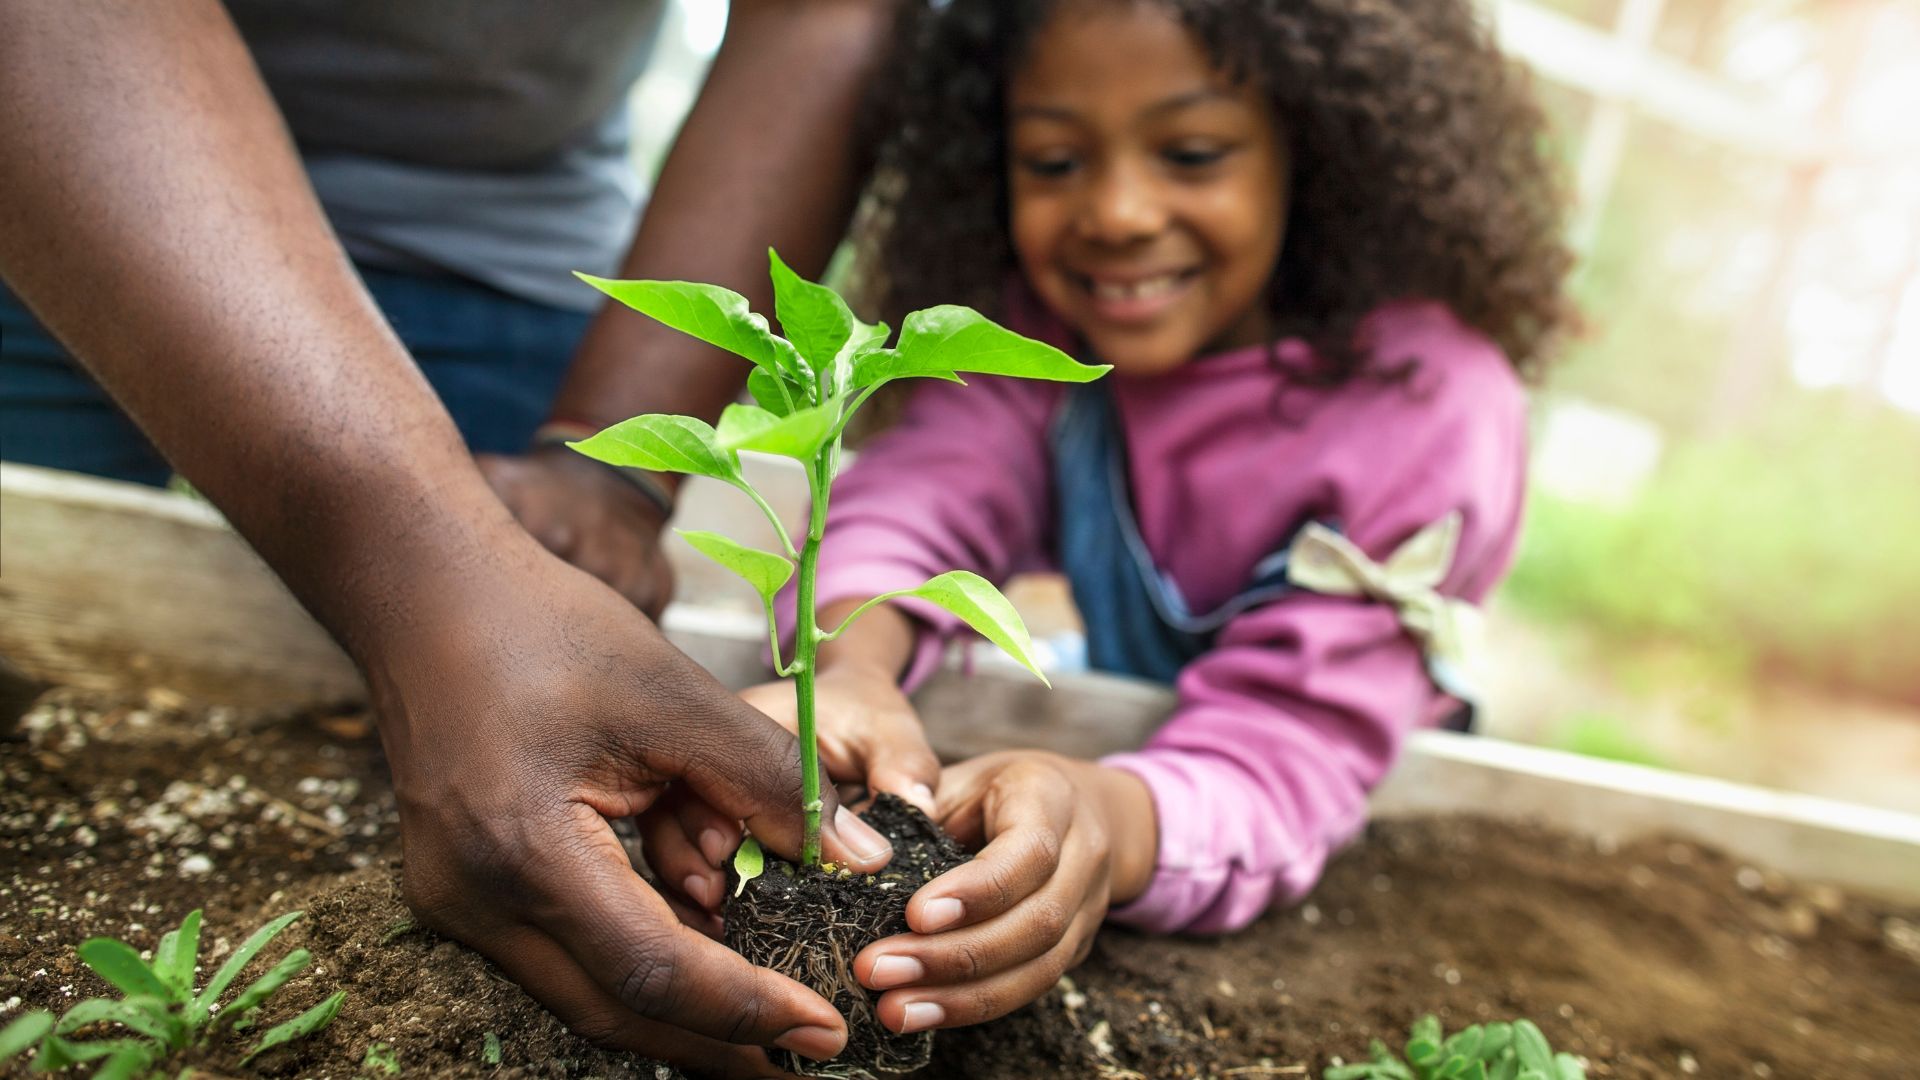 An image of a father and daughter replanting a plant in the ground.